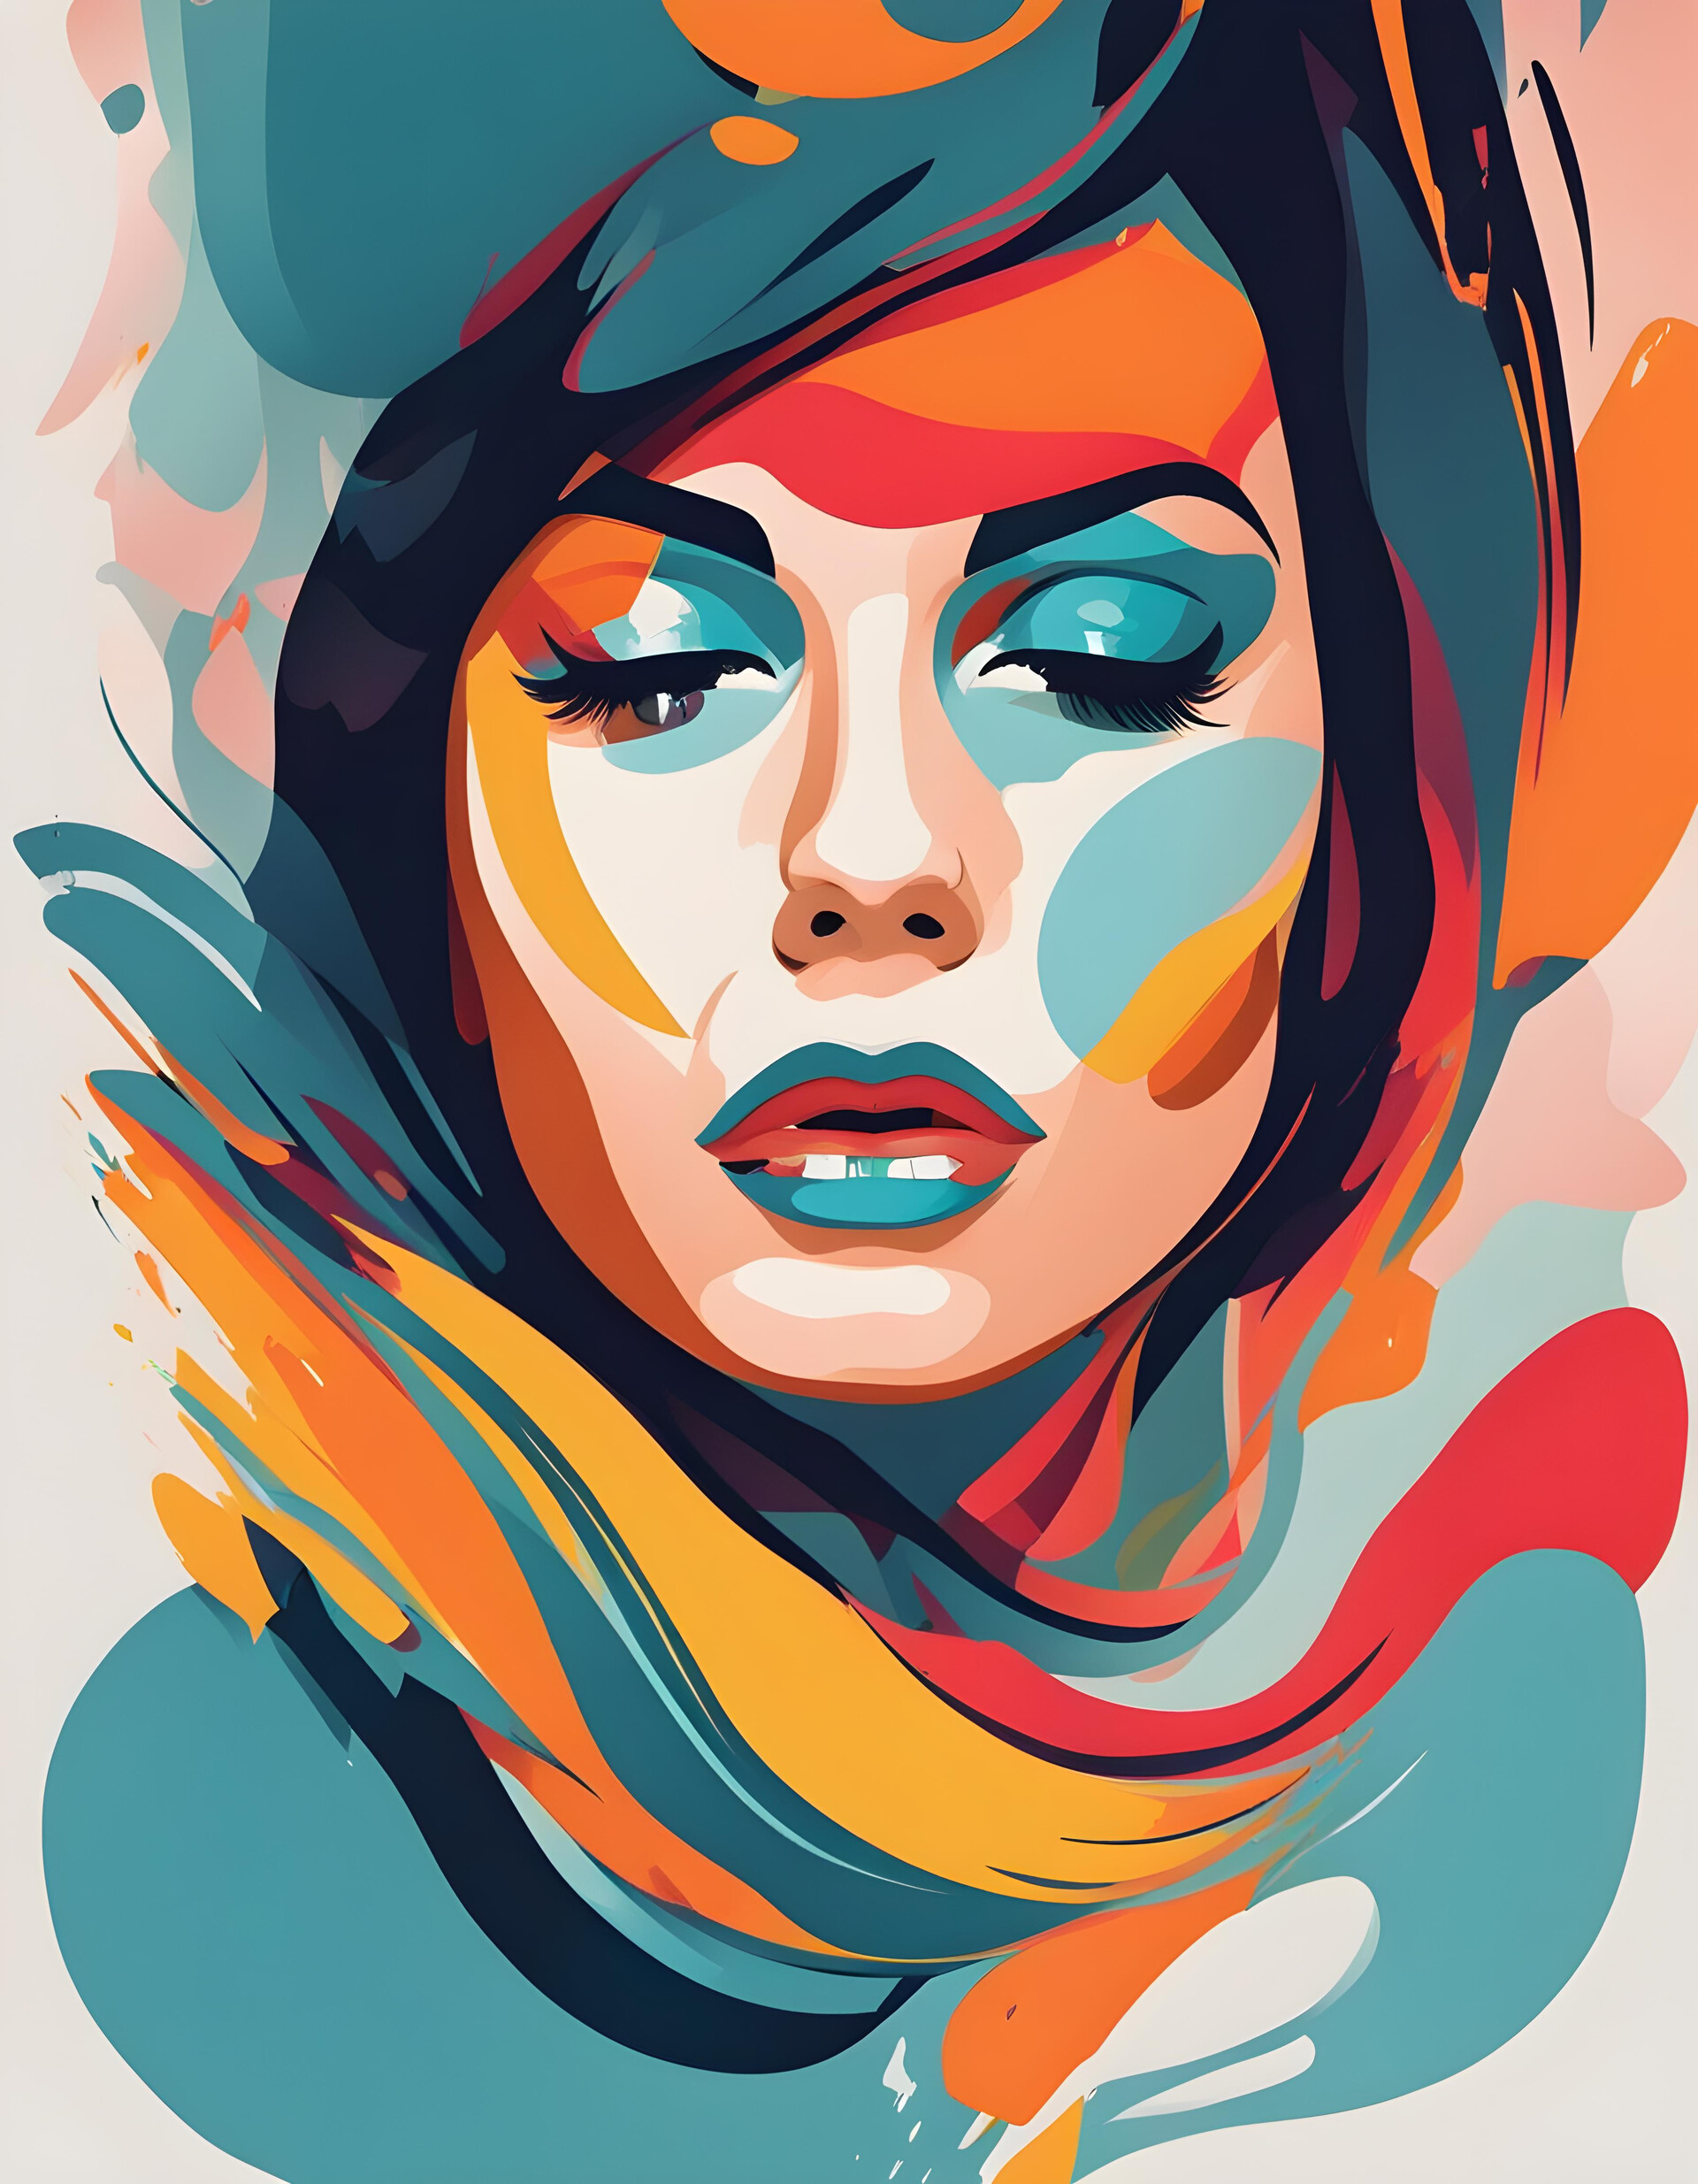 ArtStation - Abstract Portrait in Cool Poured Hues